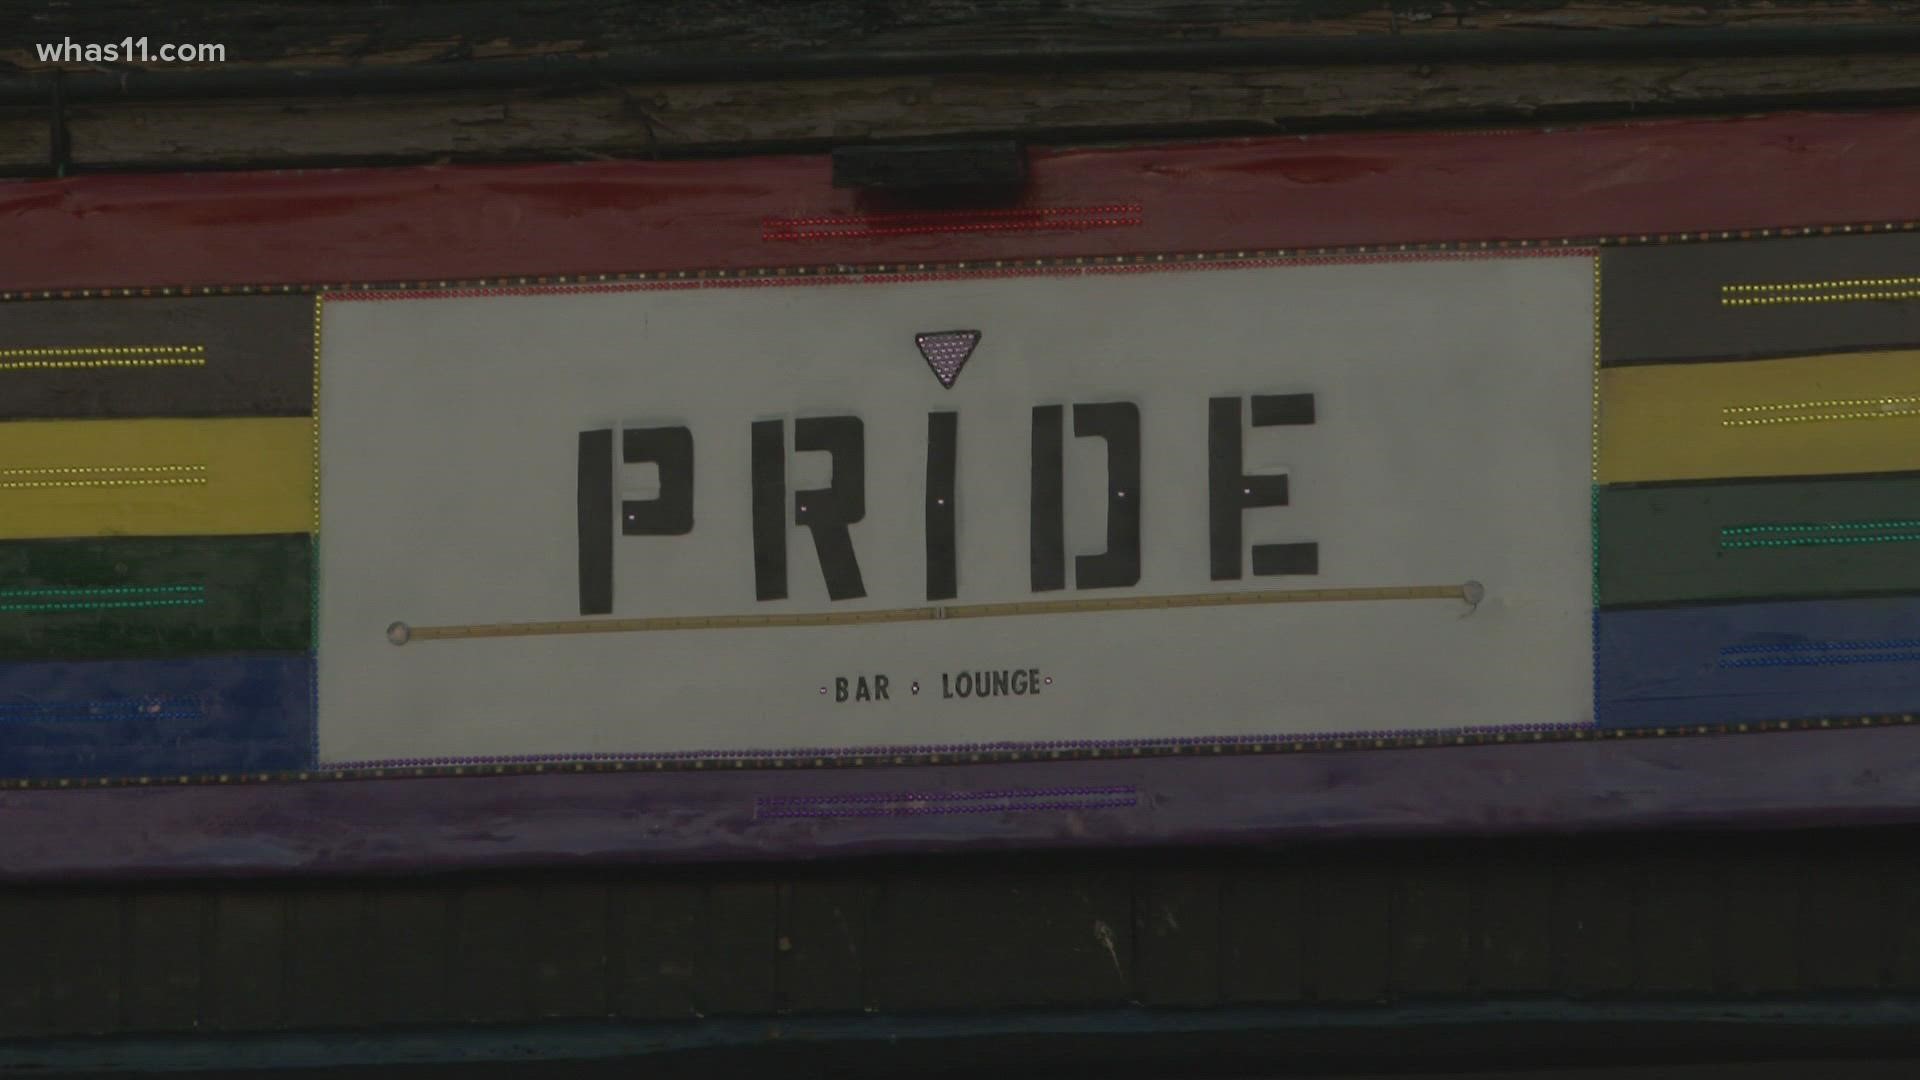 After 7 years, the Pride bar in New Albany is closing their doors for good due to the pandemic.